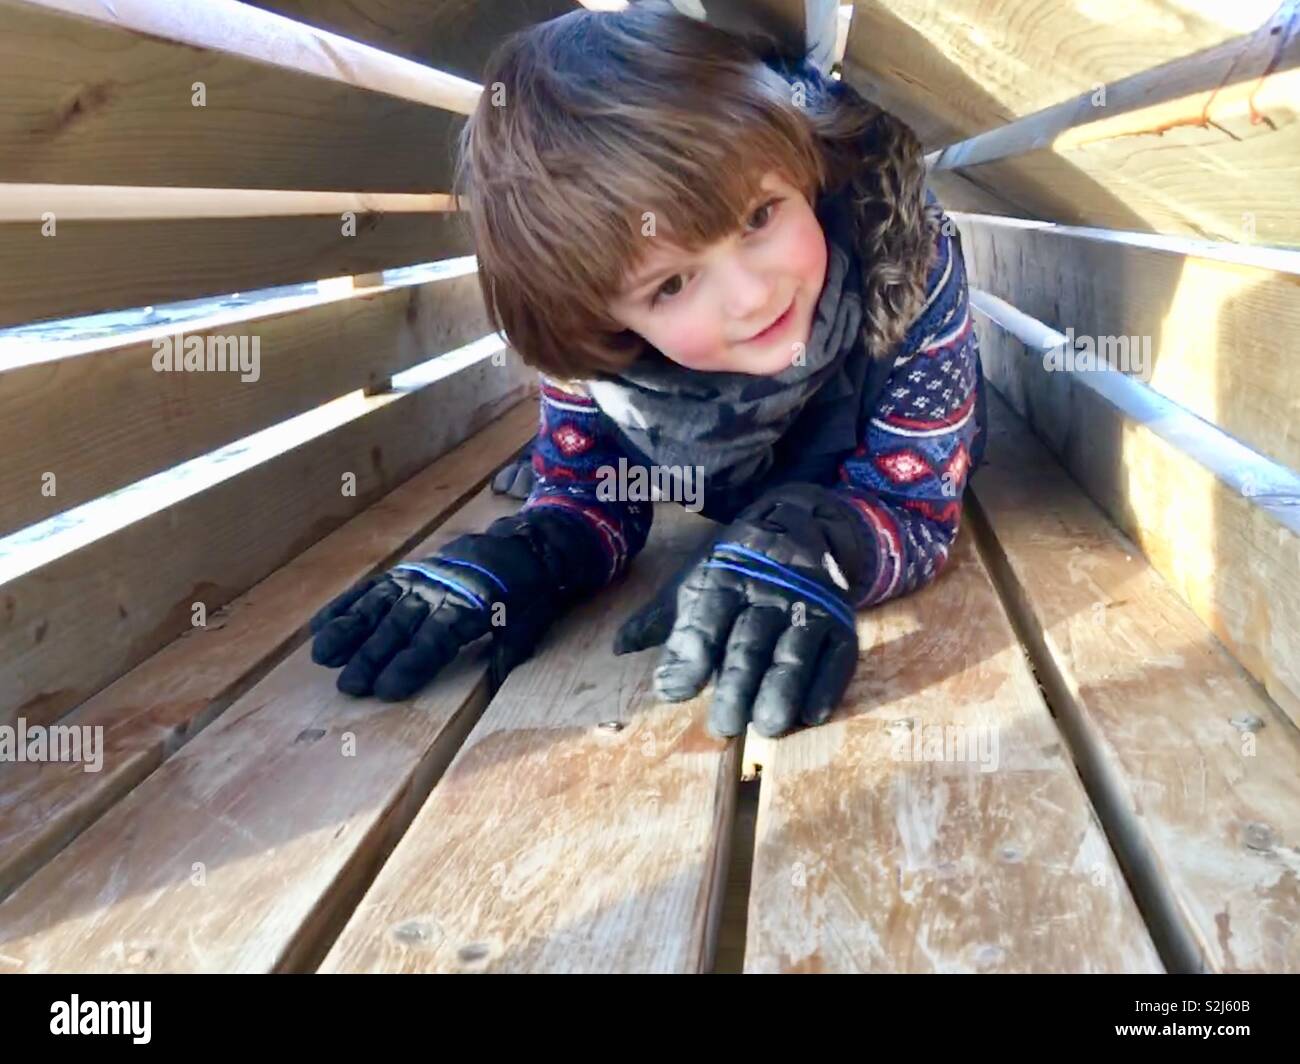 Child in a tunnel at play Stock Photo